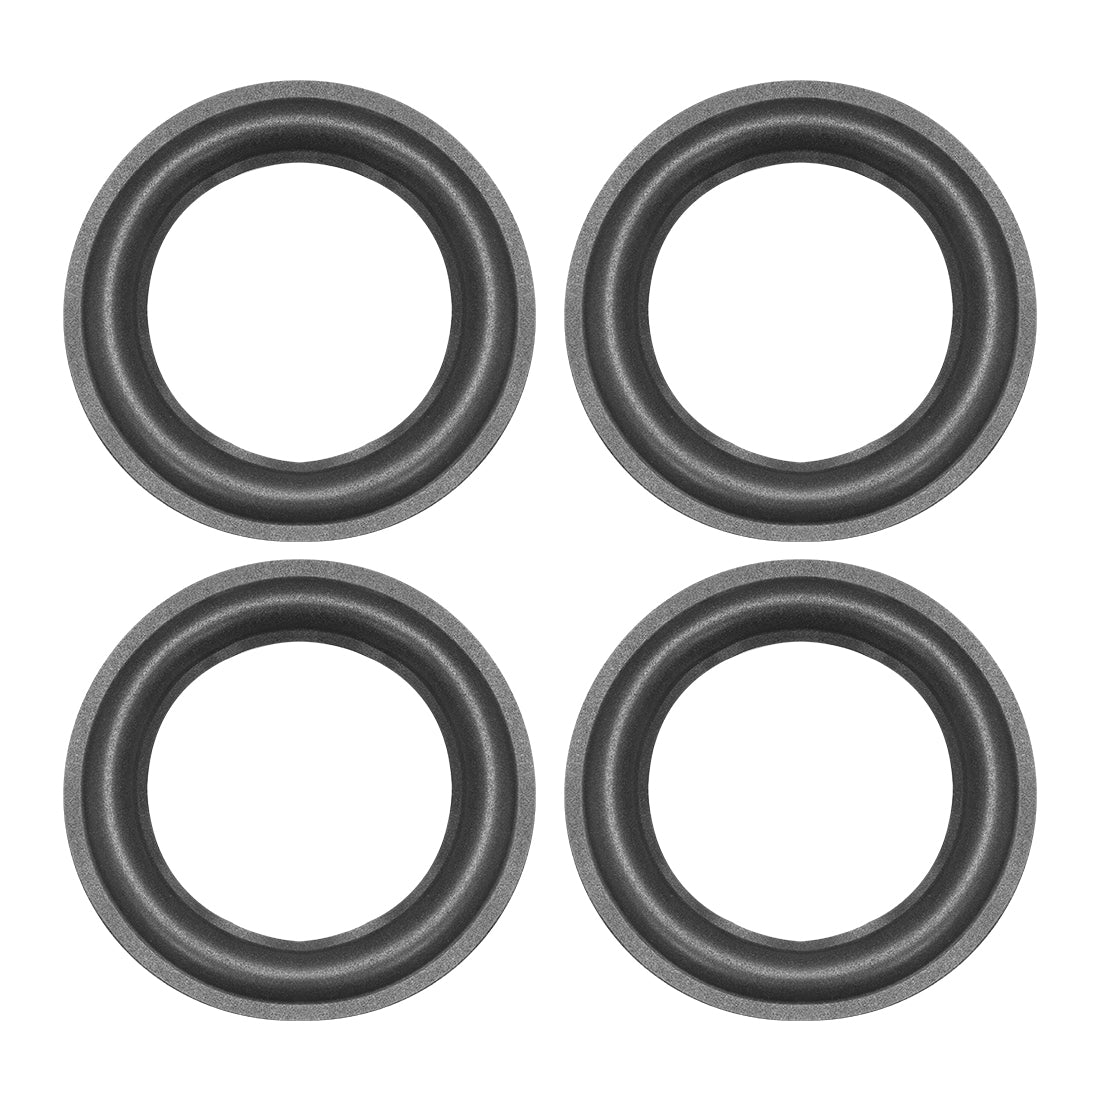 uxcell Uxcell 155mm Foam Edge Surround Rings Replacement Part for Repair or DIY 4pcs